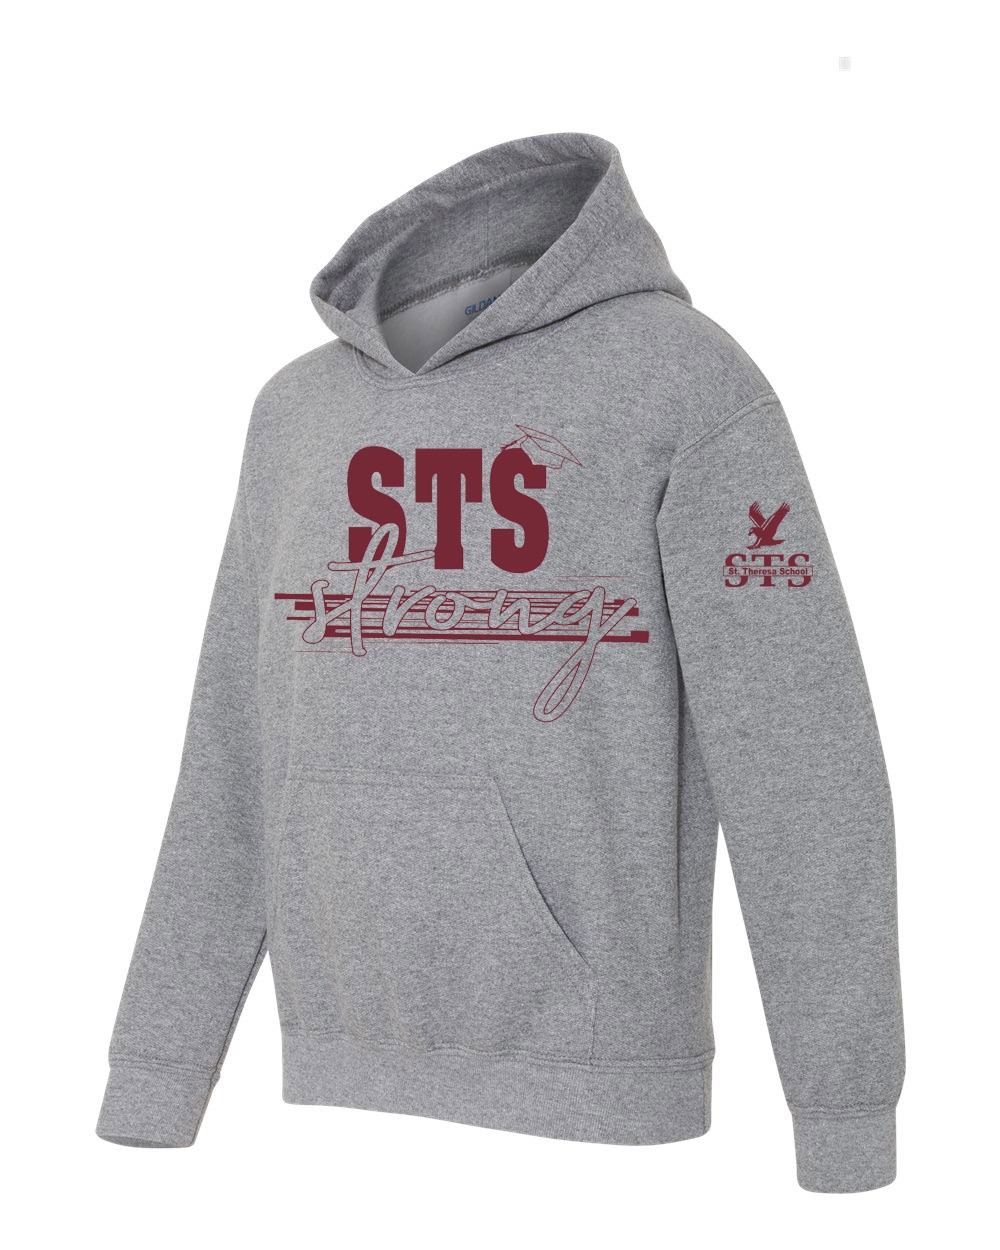 STS Spirit Strong Pullover Hoodie w/ Maroon Logo - Please allow 2-3 Weeks for Delivery